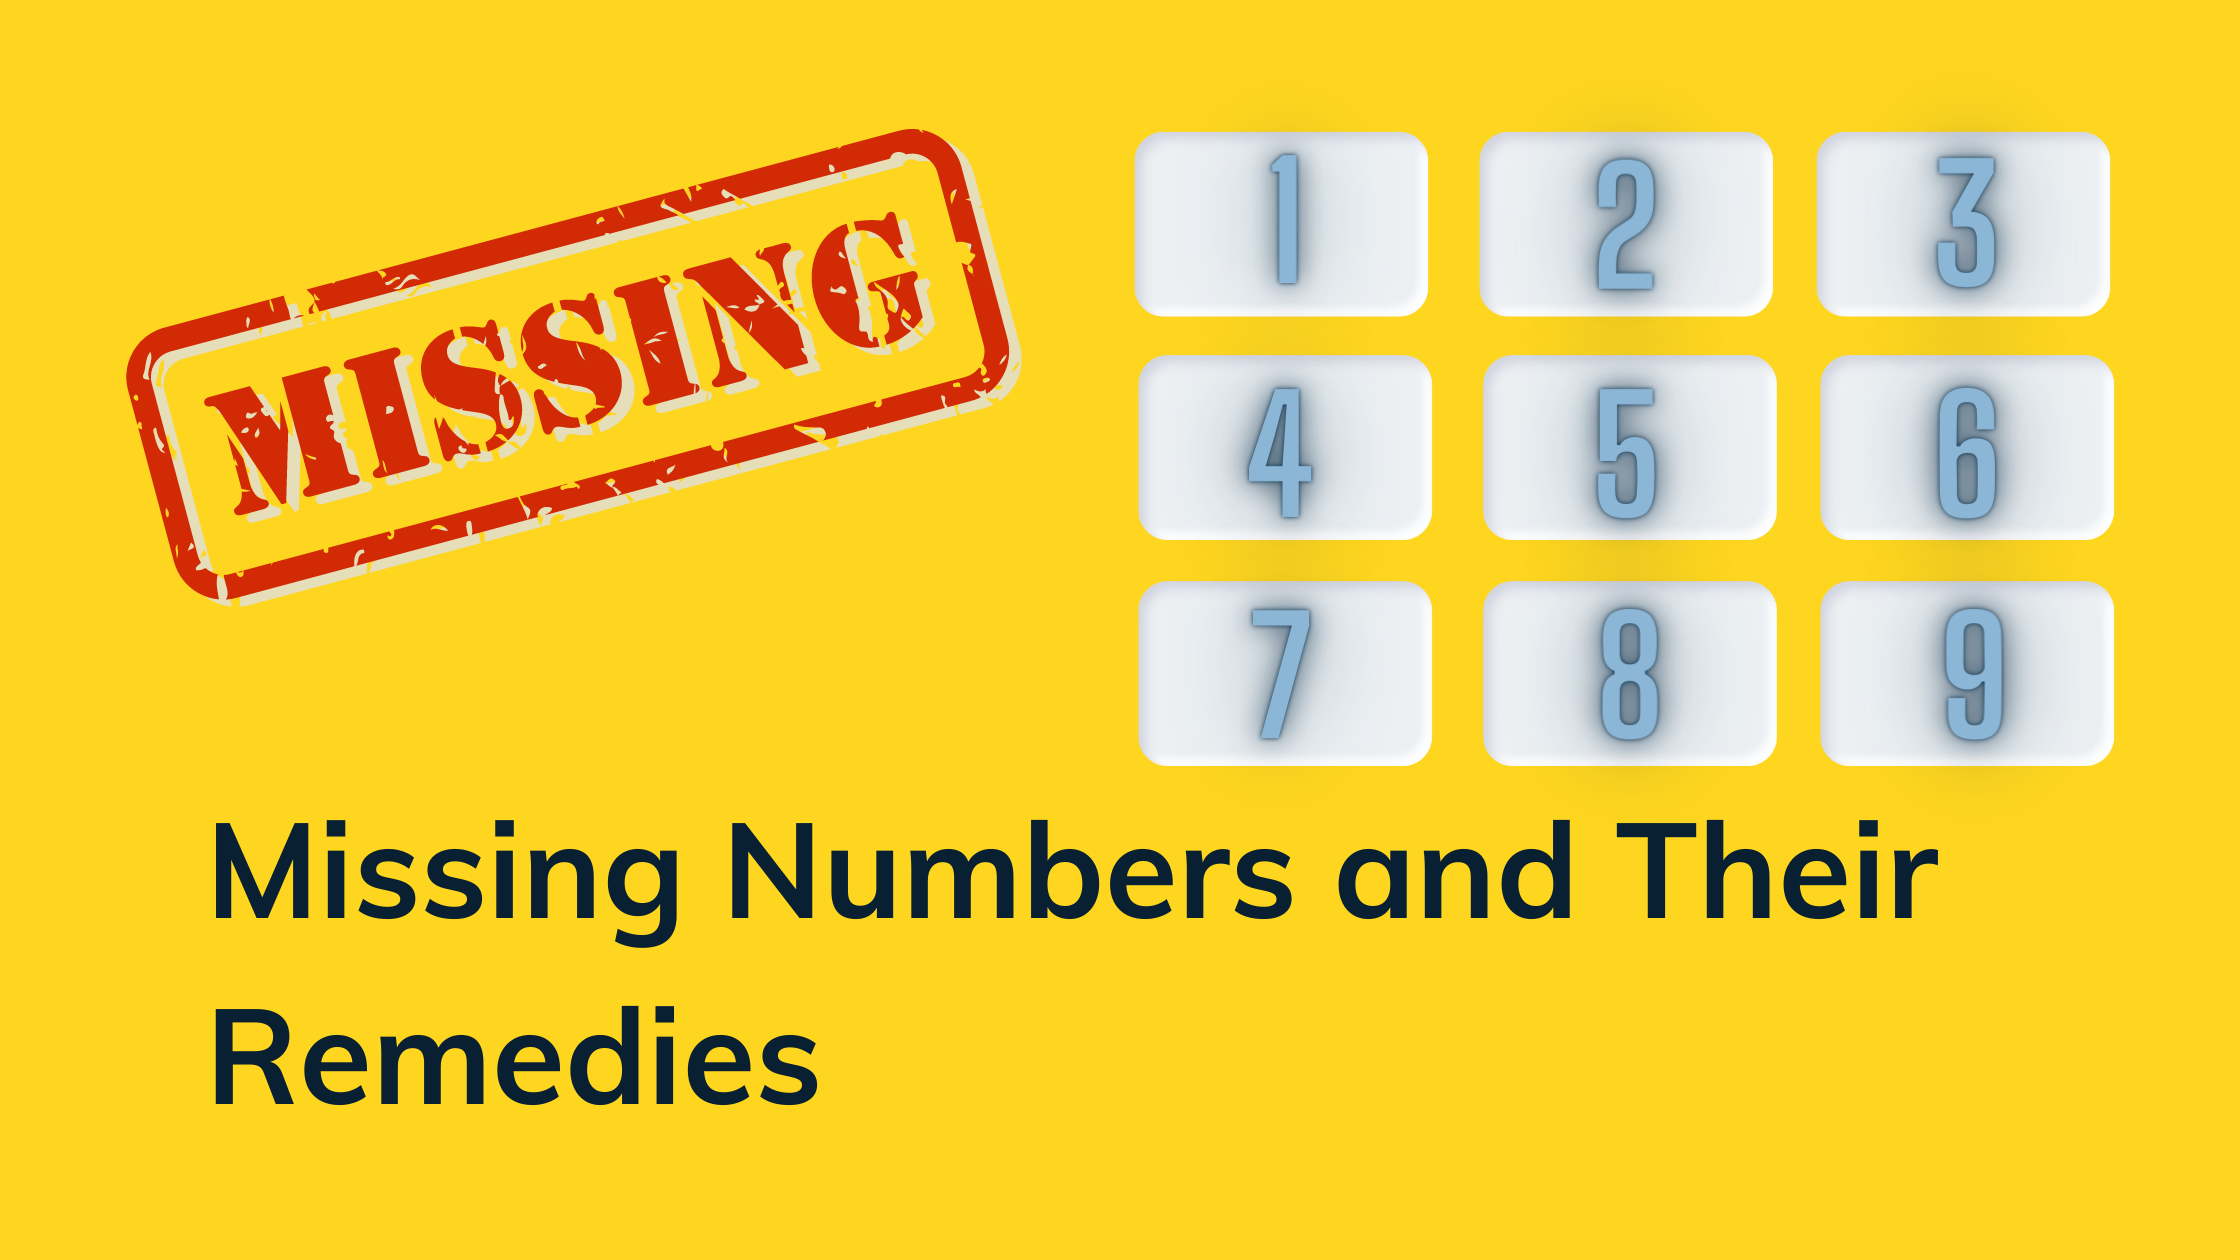 lo-shu-grid-missing-numbers-and-their-remedies-numerology-by-nehaa